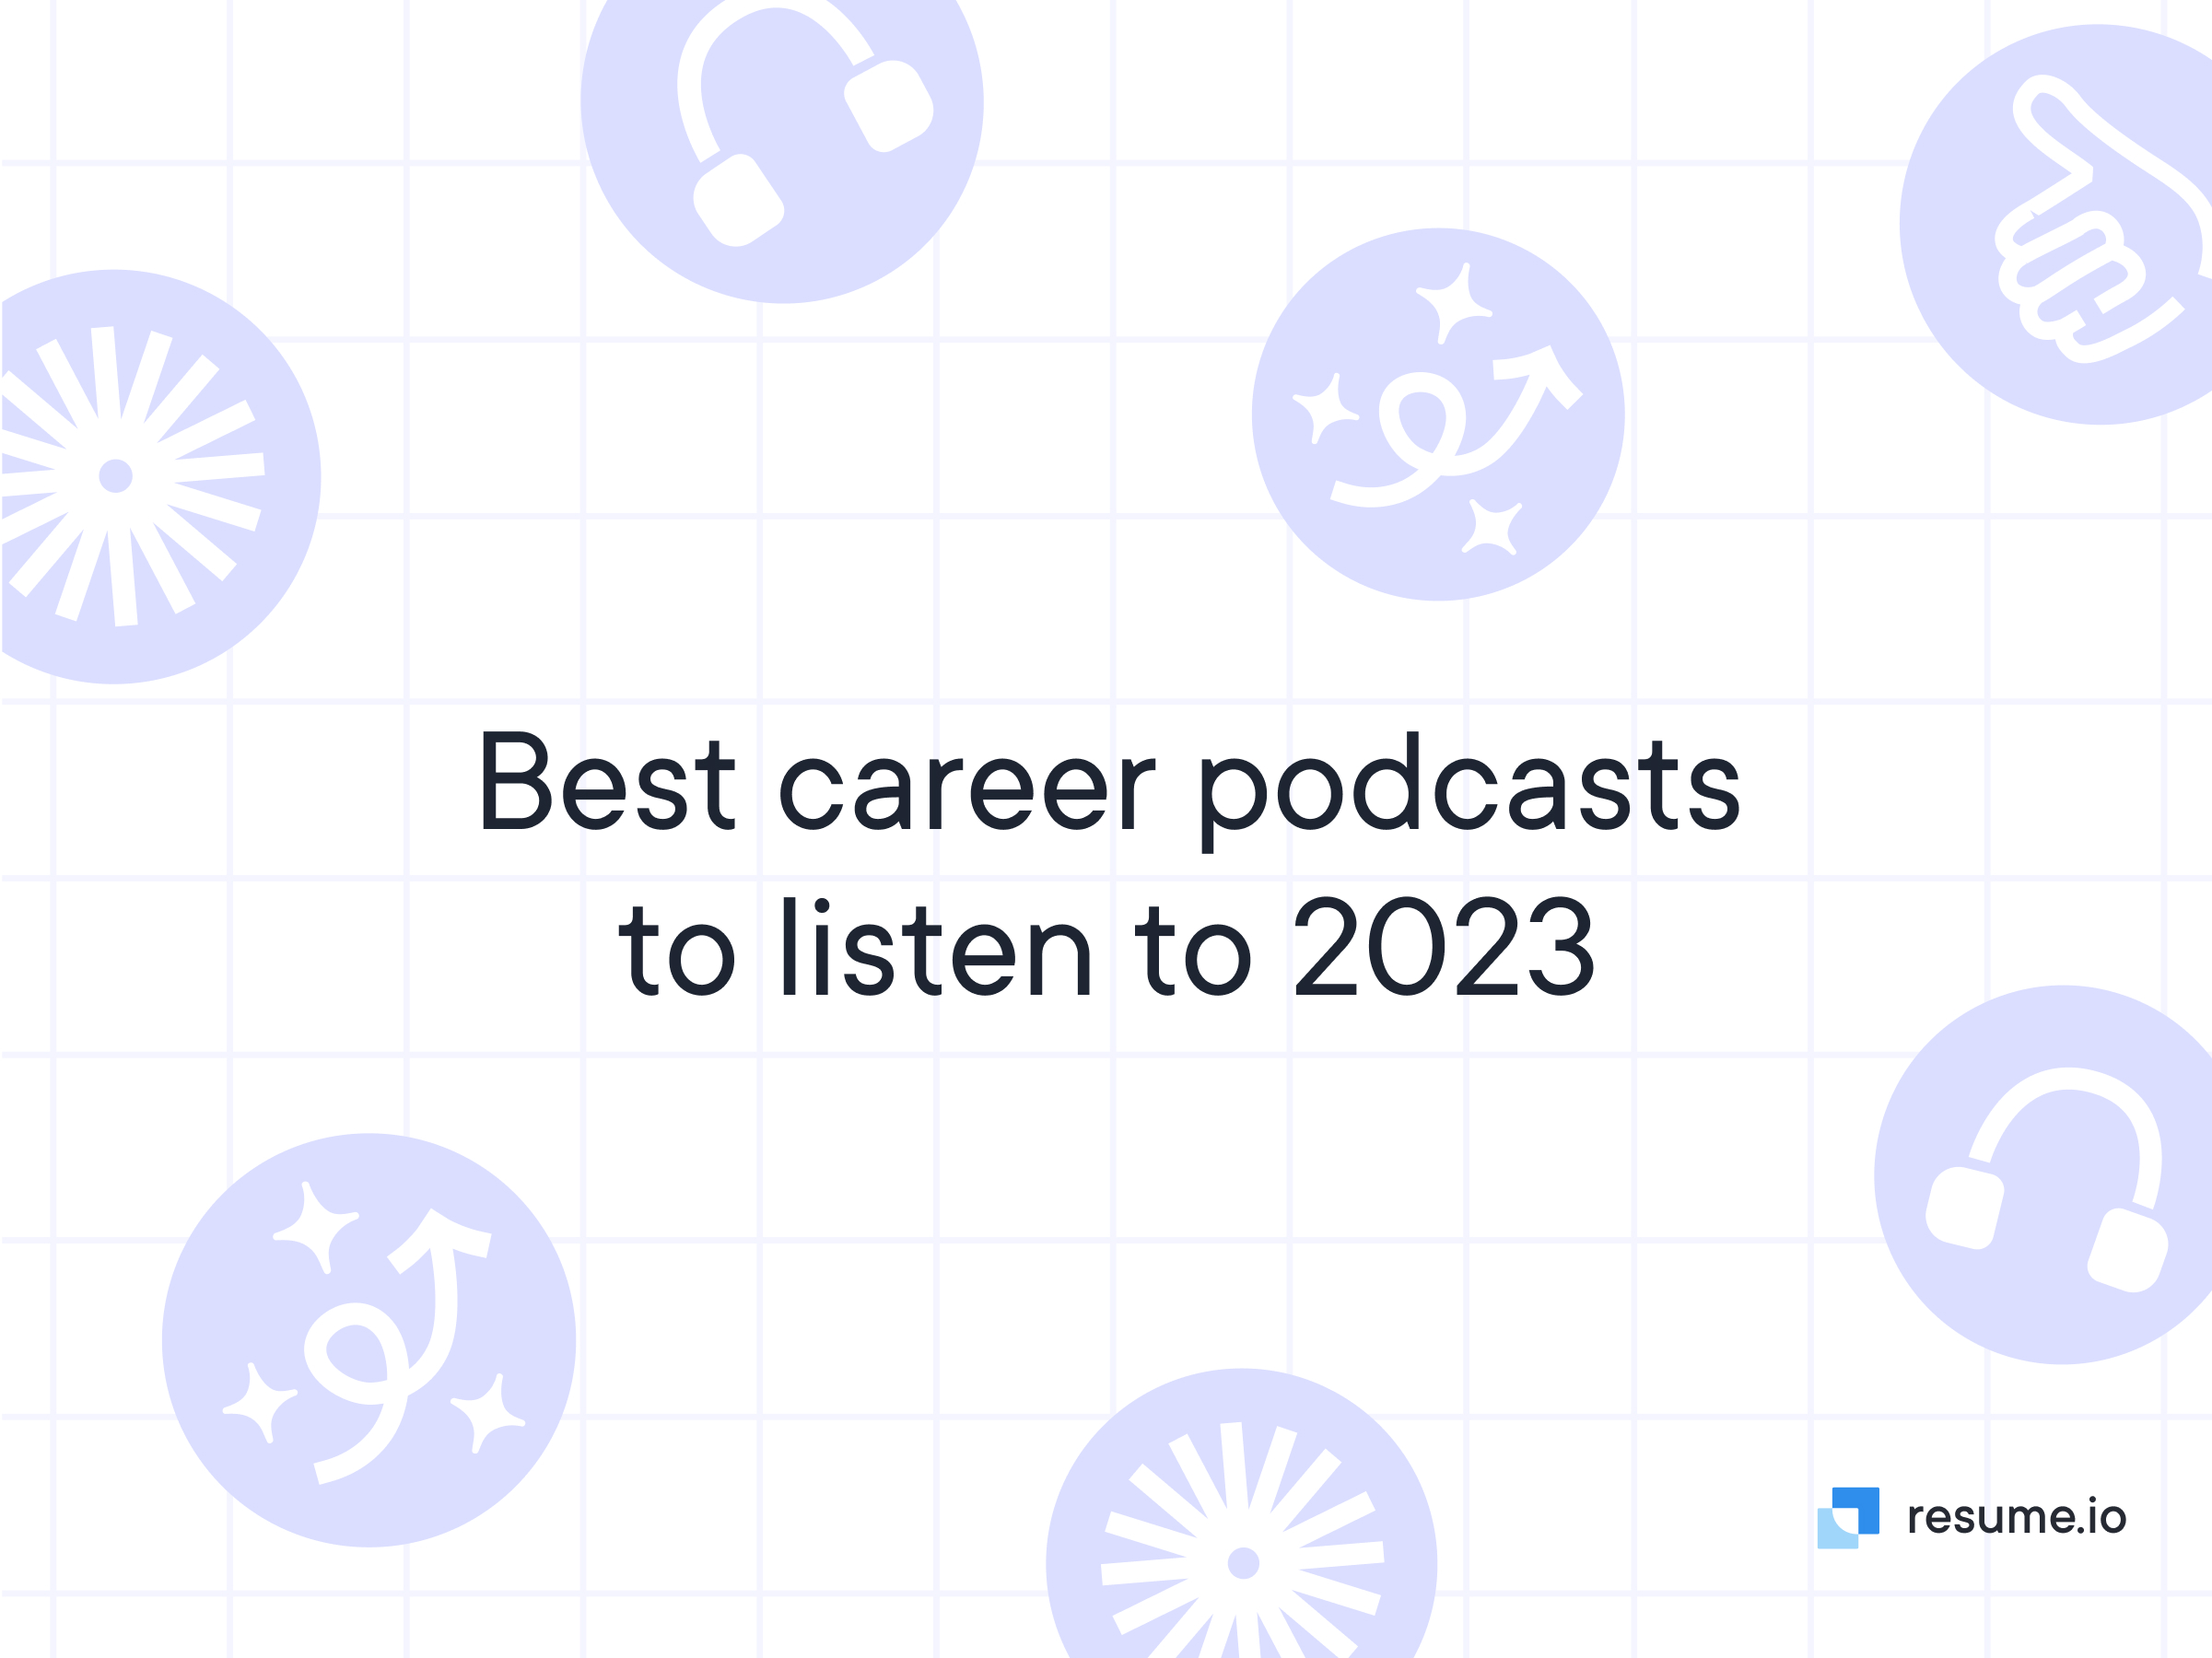 Best career podcasts to listen in 2023